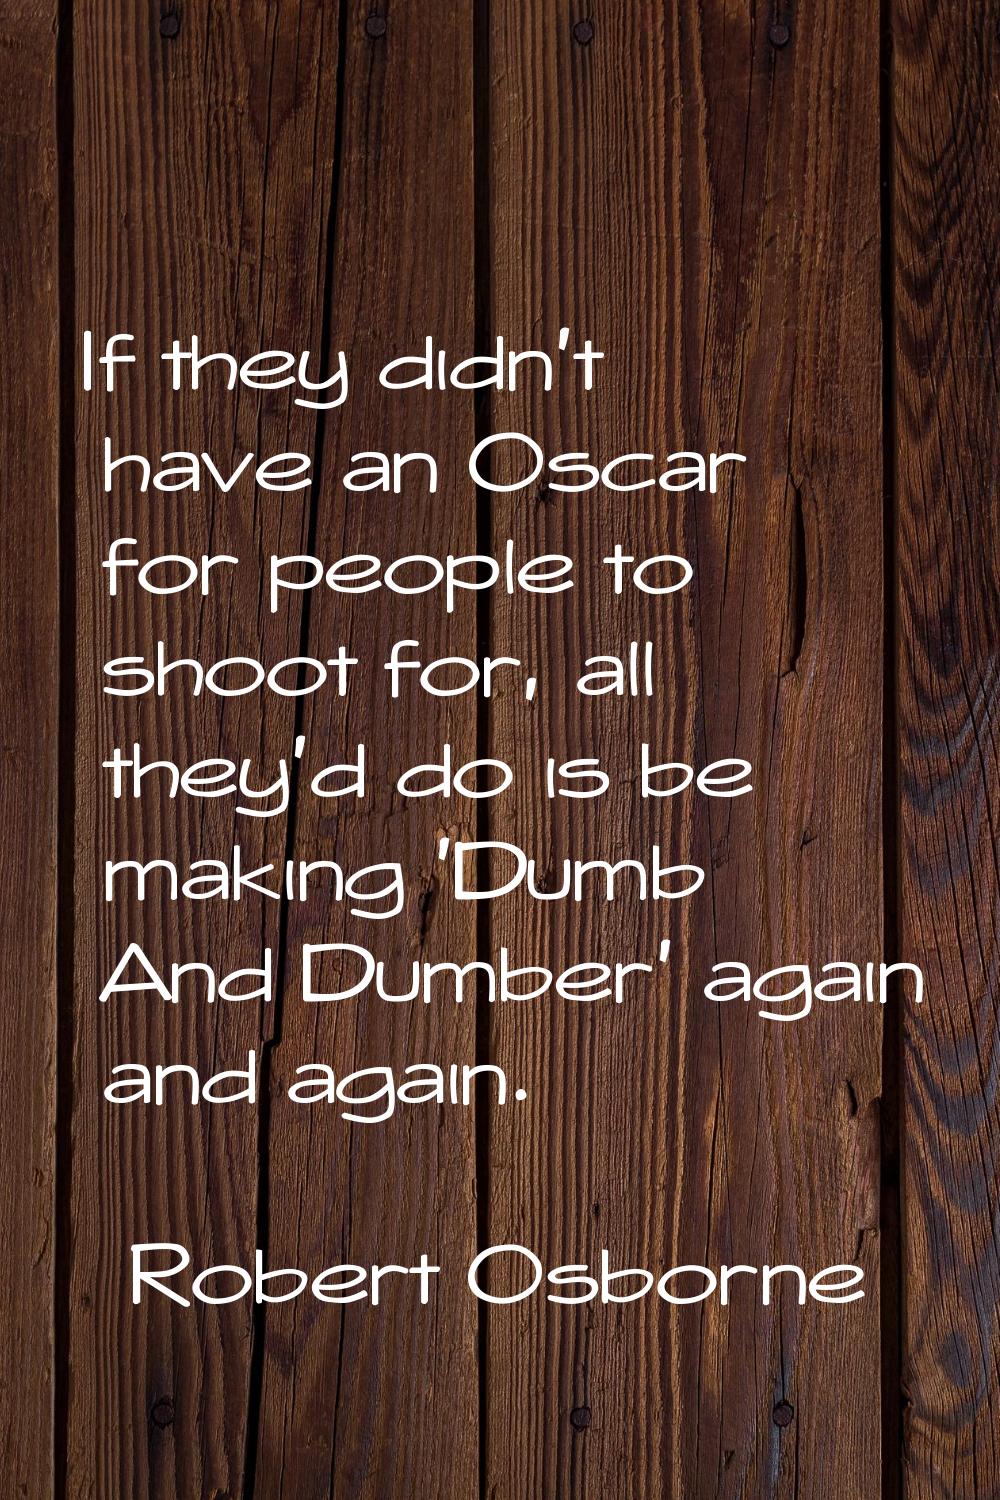 If they didn't have an Oscar for people to shoot for, all they'd do is be making 'Dumb And Dumber' 